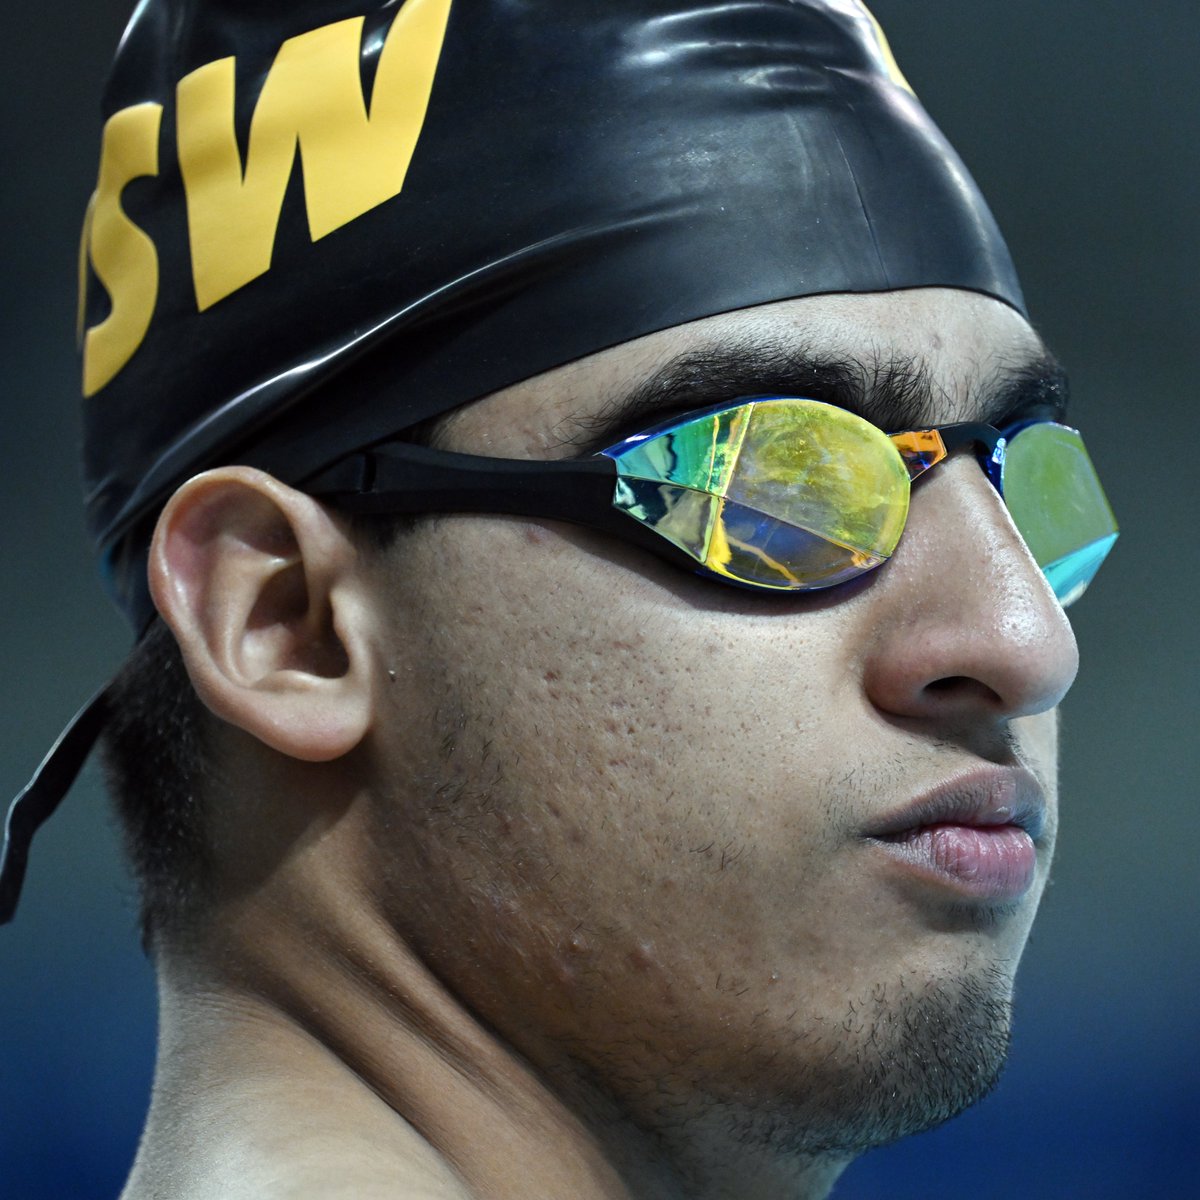 Big weekend with even bigger swims. Both Shelby Newkirk (50 back S6) and Sebastian Massabie (50 fly S4) broke World Records at last weekends Citi Para Swimming World Series 🙌 🔗 tinyurl.com/3exsy6sx